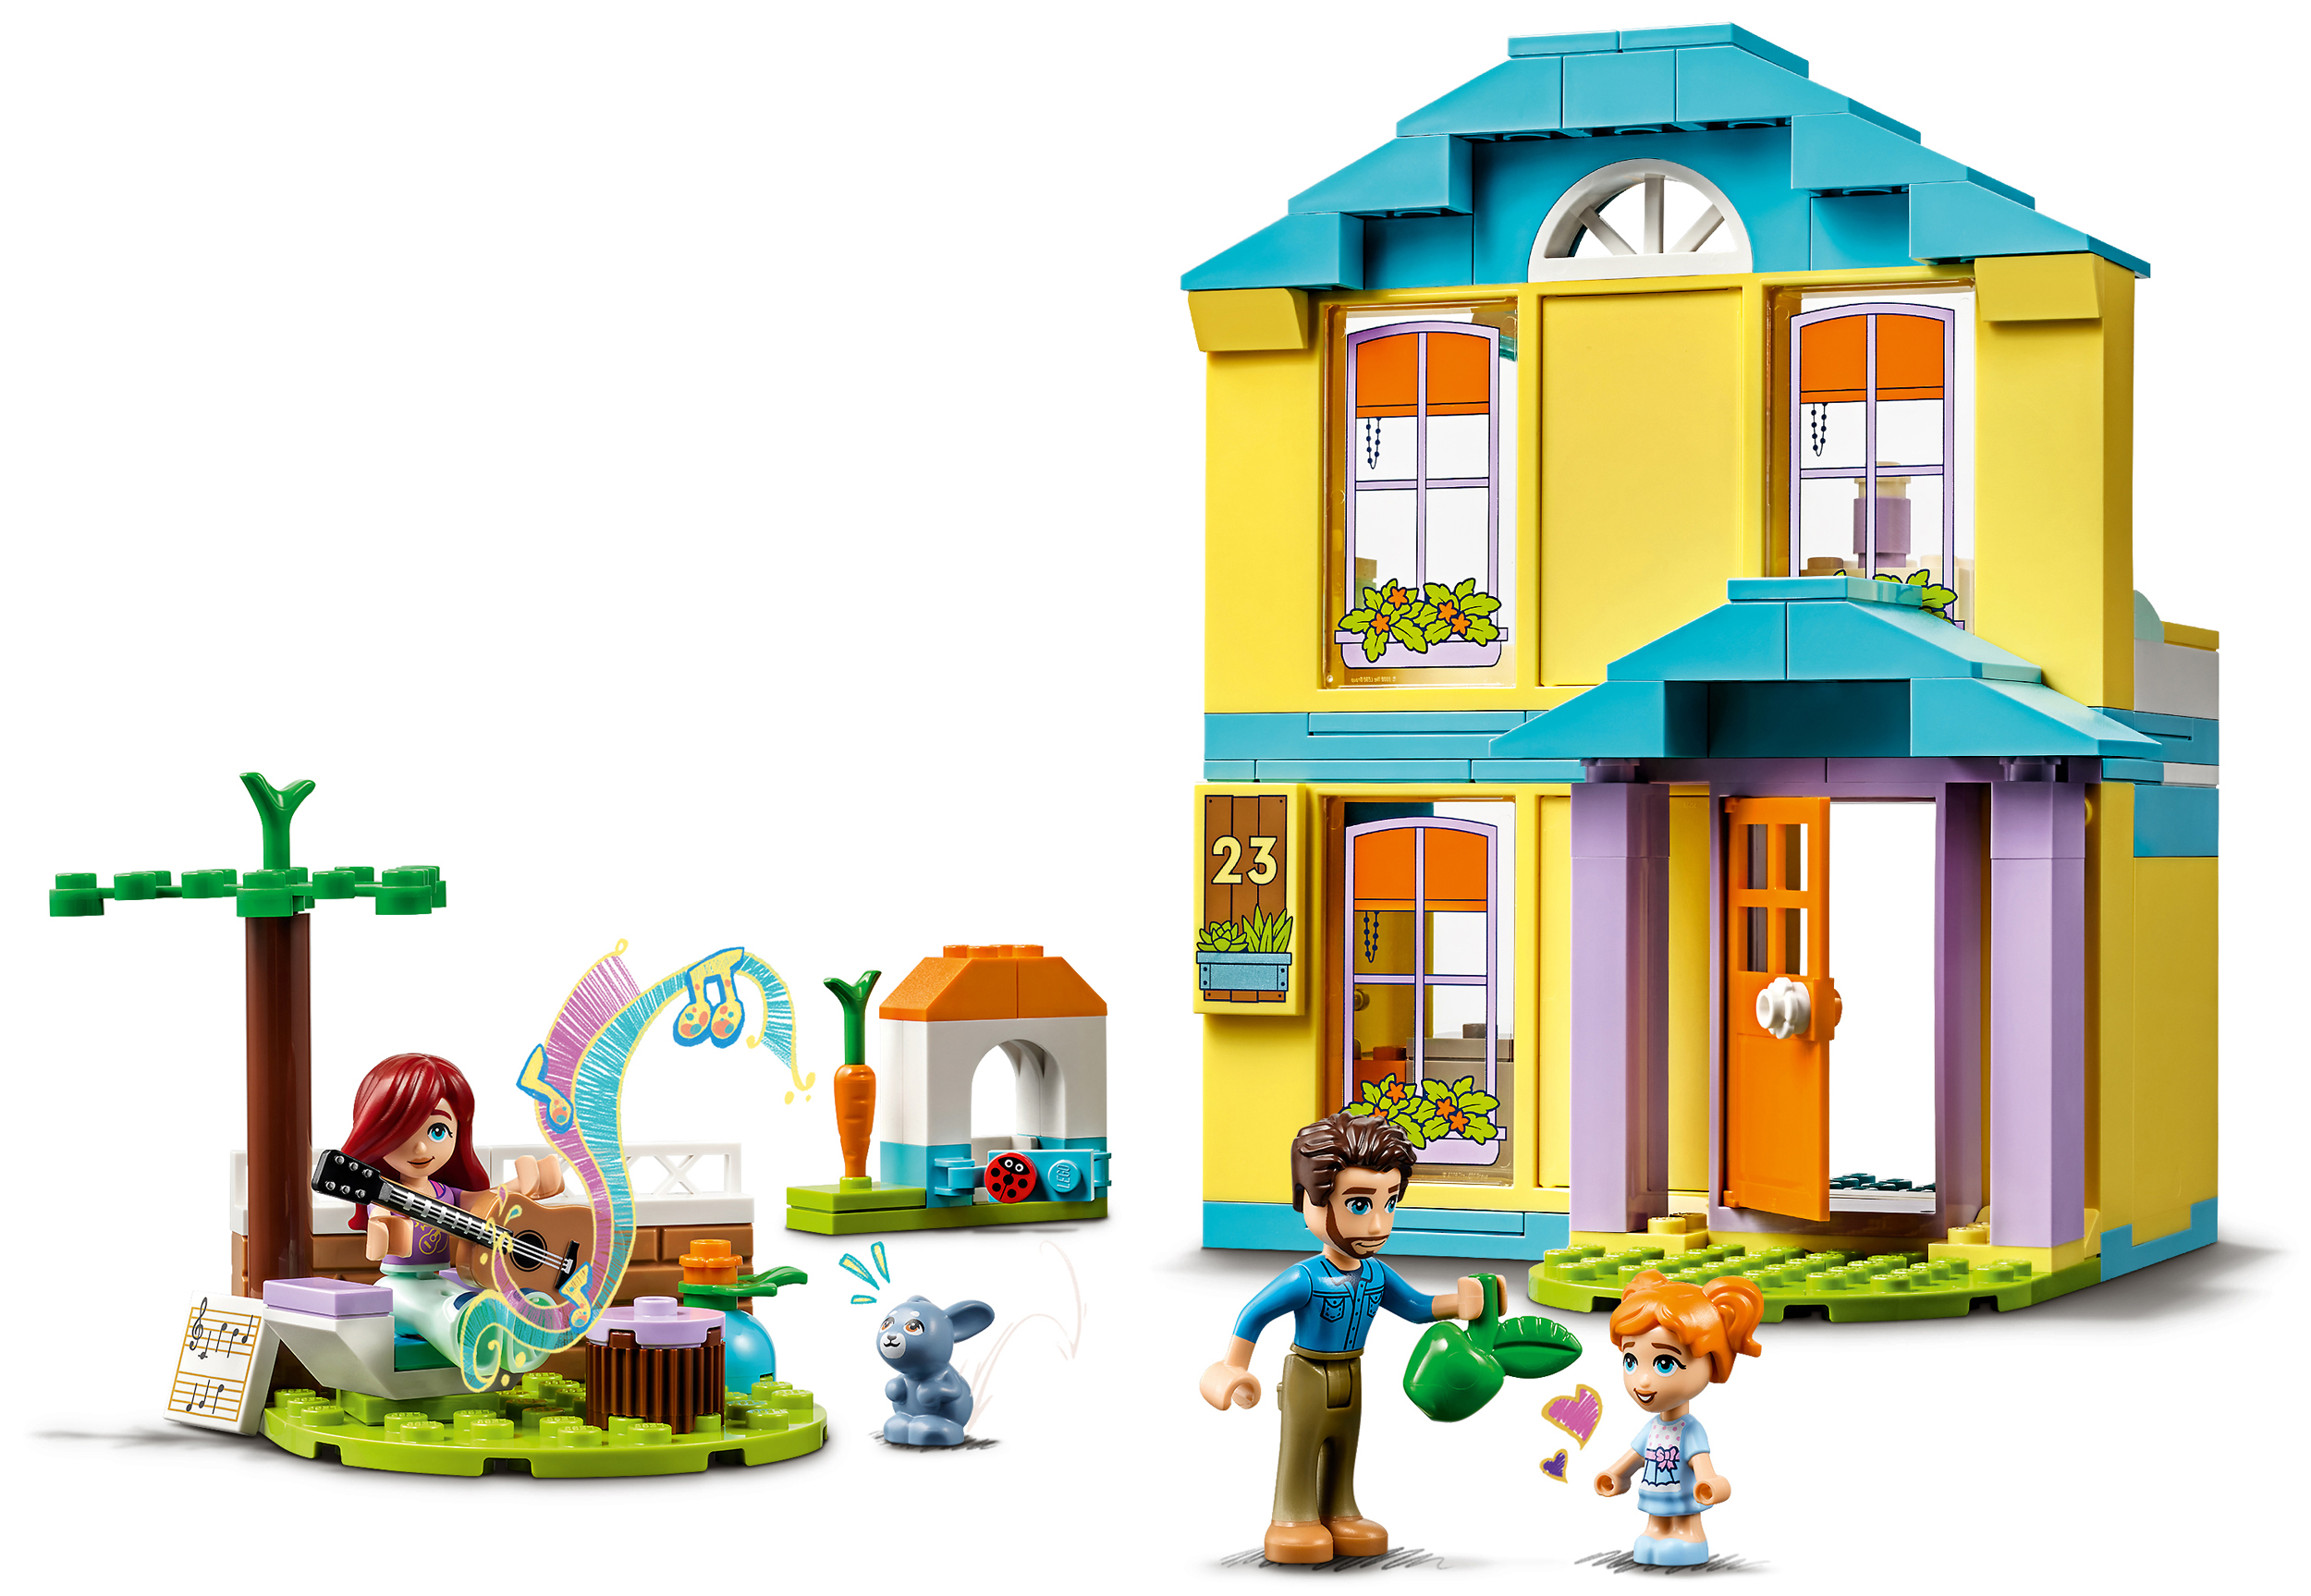 LEGO Friends 2023 Animated Series Officially Announced - The Brick Fan